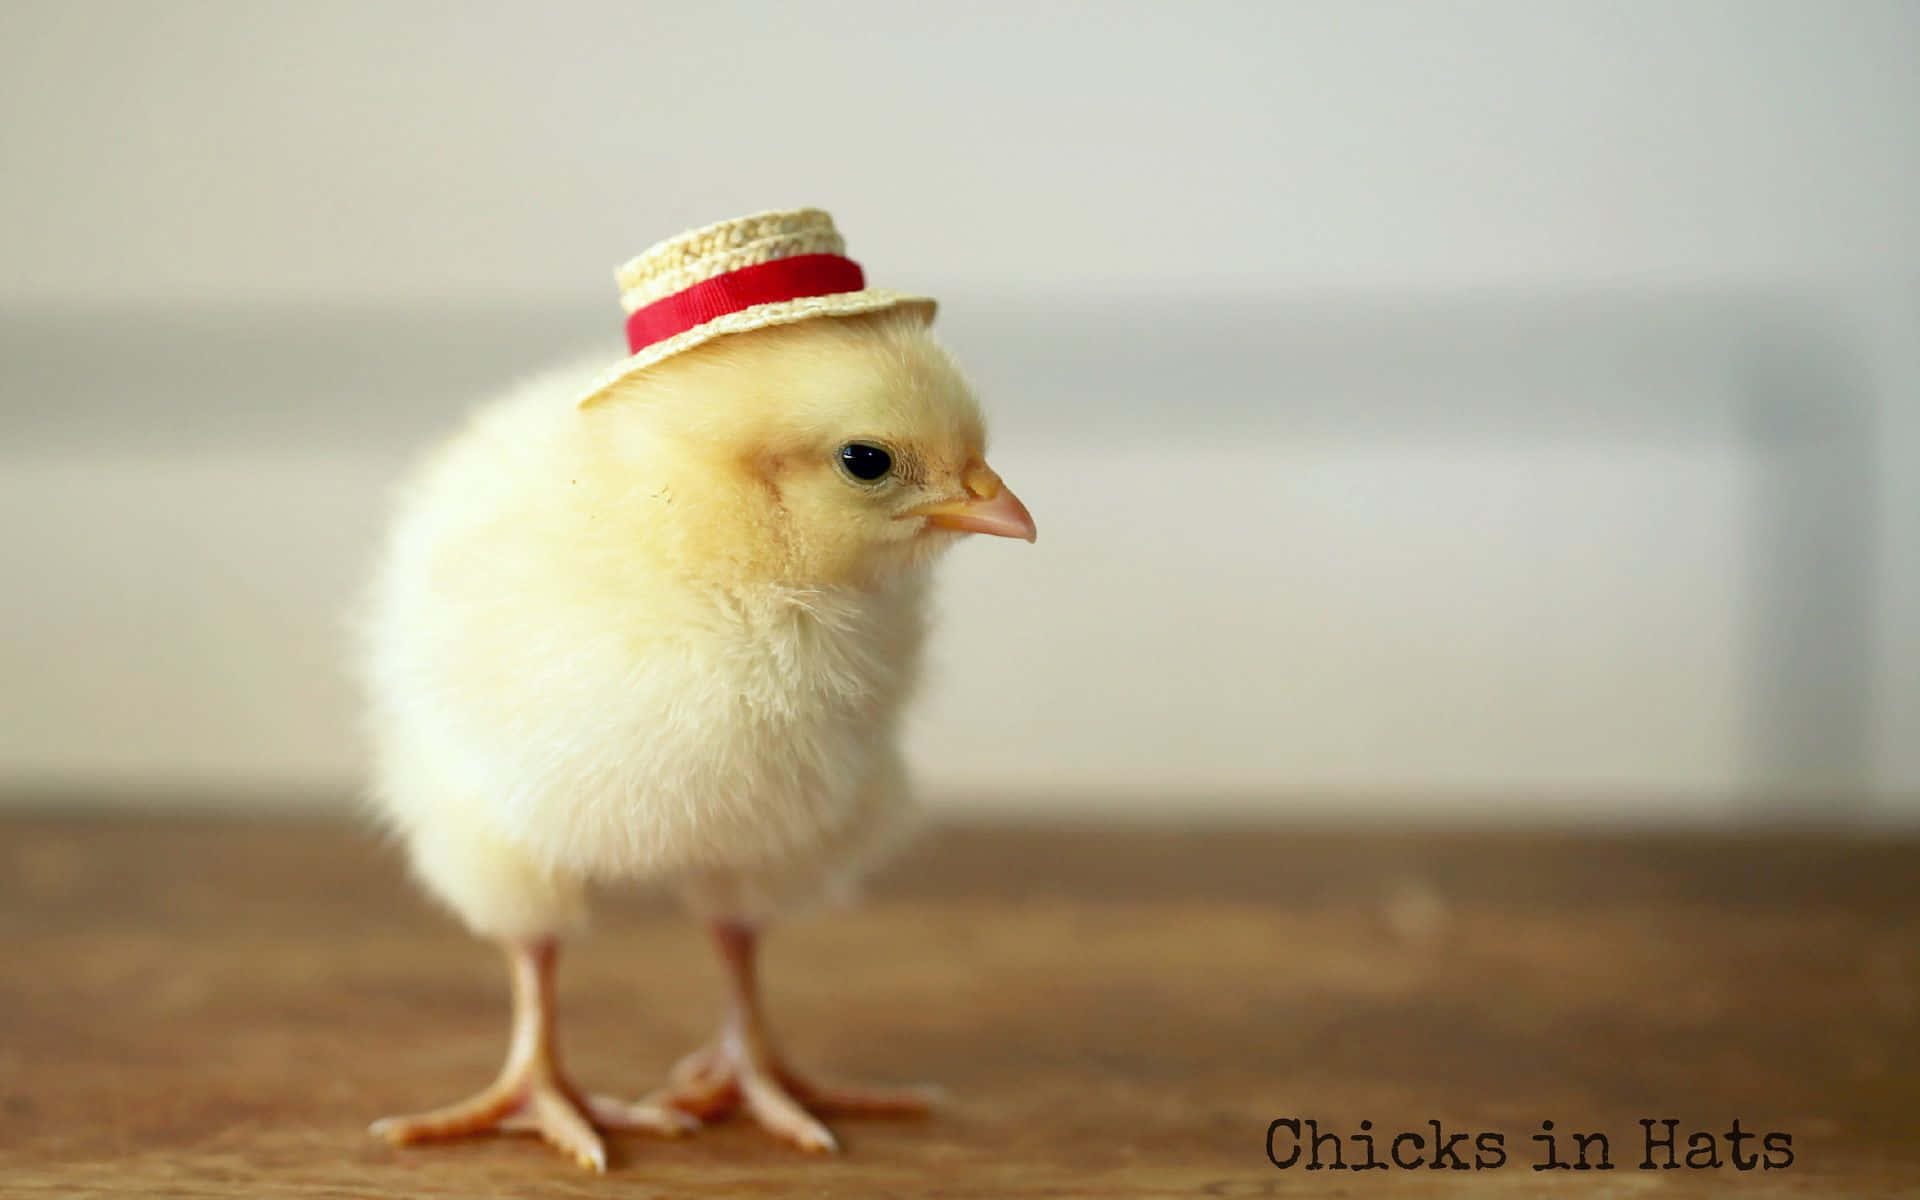 A Small Chicken Wearing A Hat